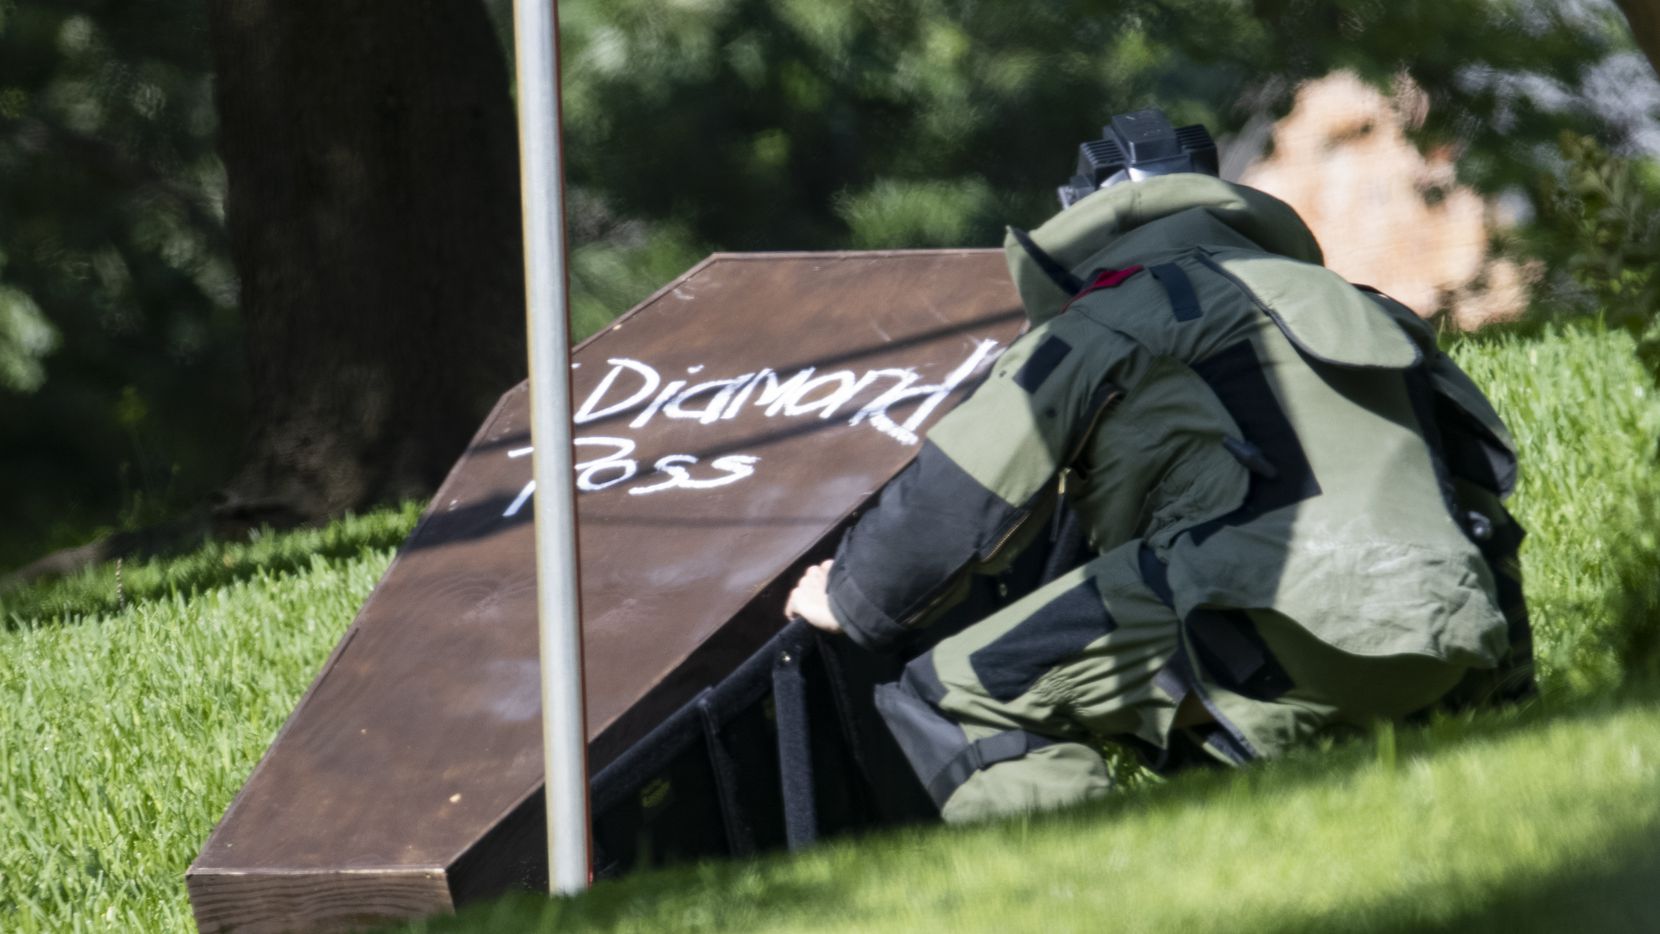 A bomb squad member investigates the coffin that was placed on Dallas County District Attorney John Creuzot's front lawn May 29, 2021.